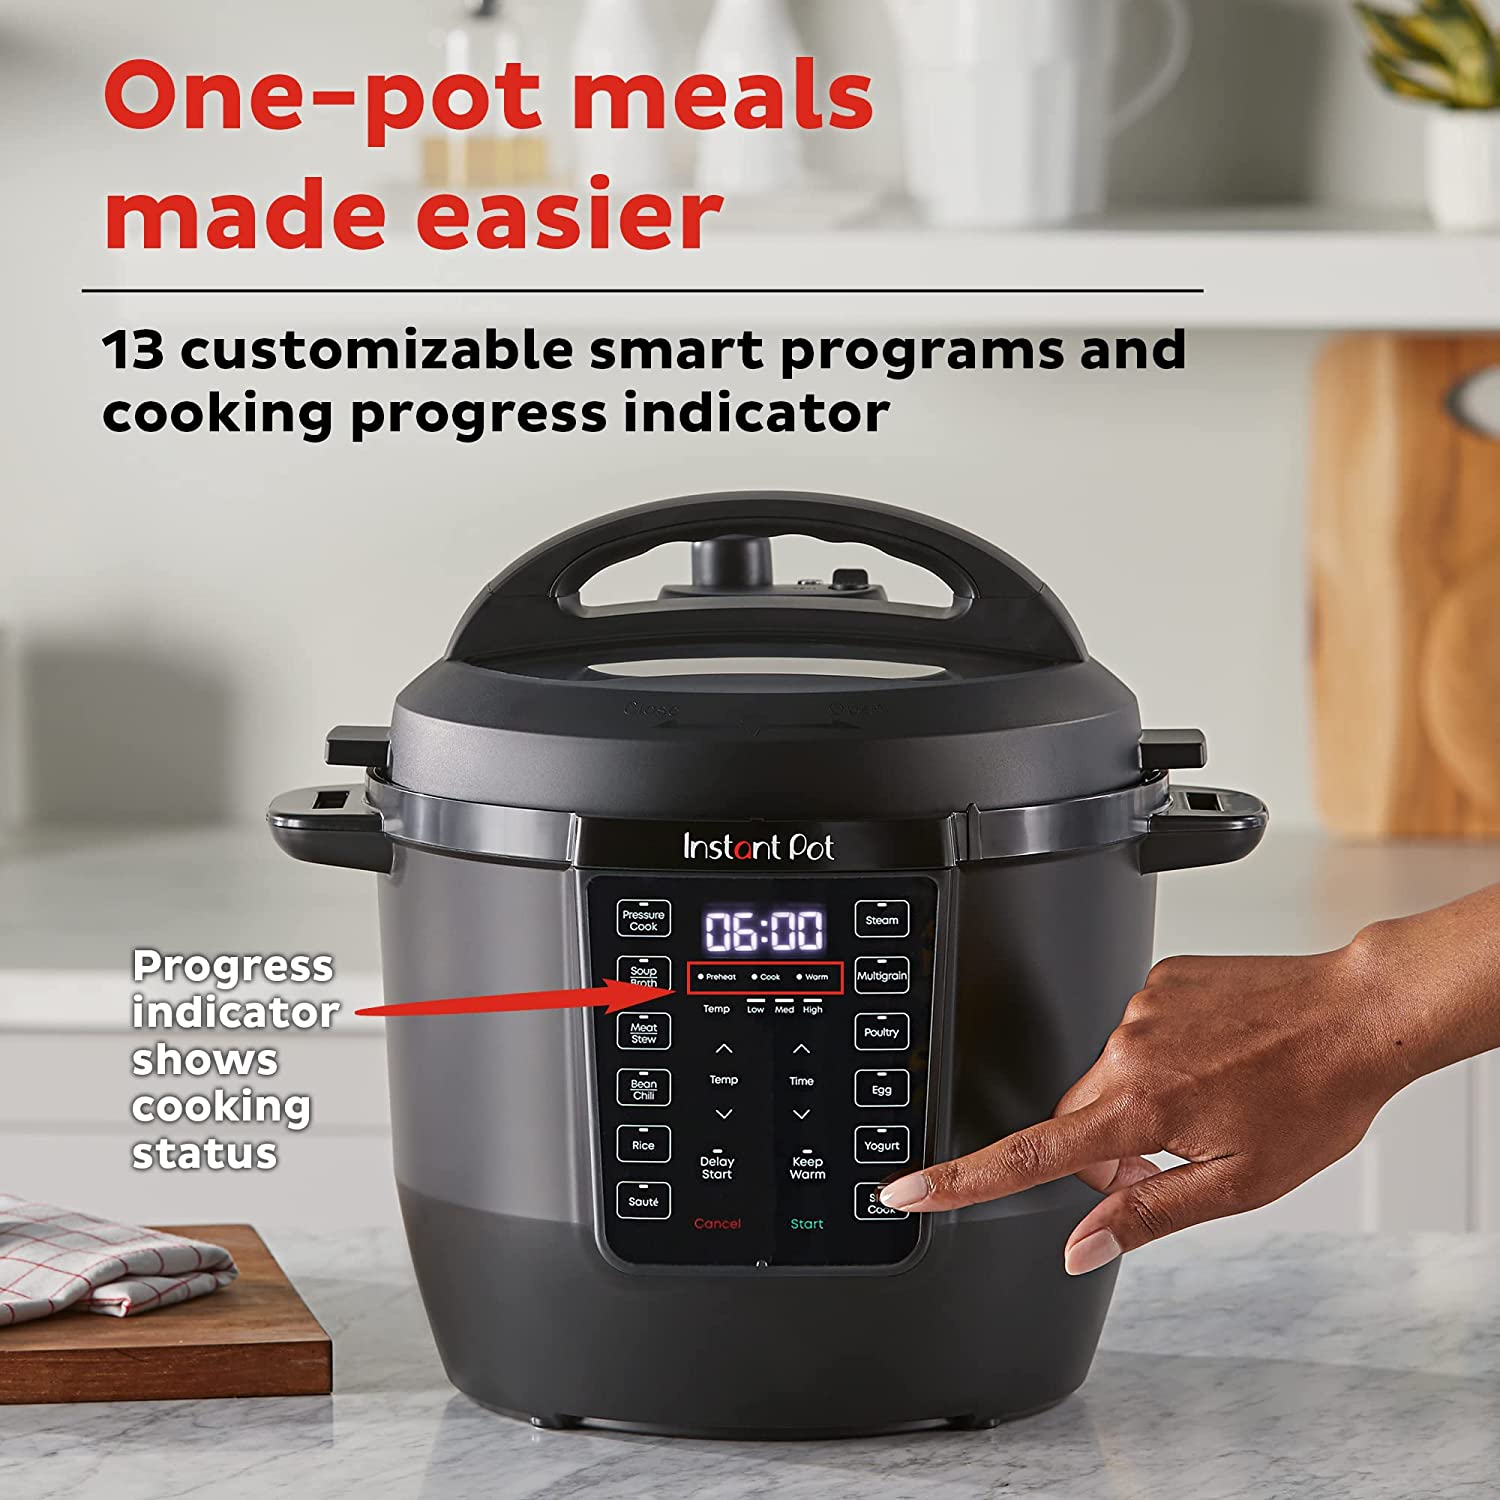 Instant Pot RIO, Formerly Known as Duo, 7 in 1 Electric Multi Cooker. 